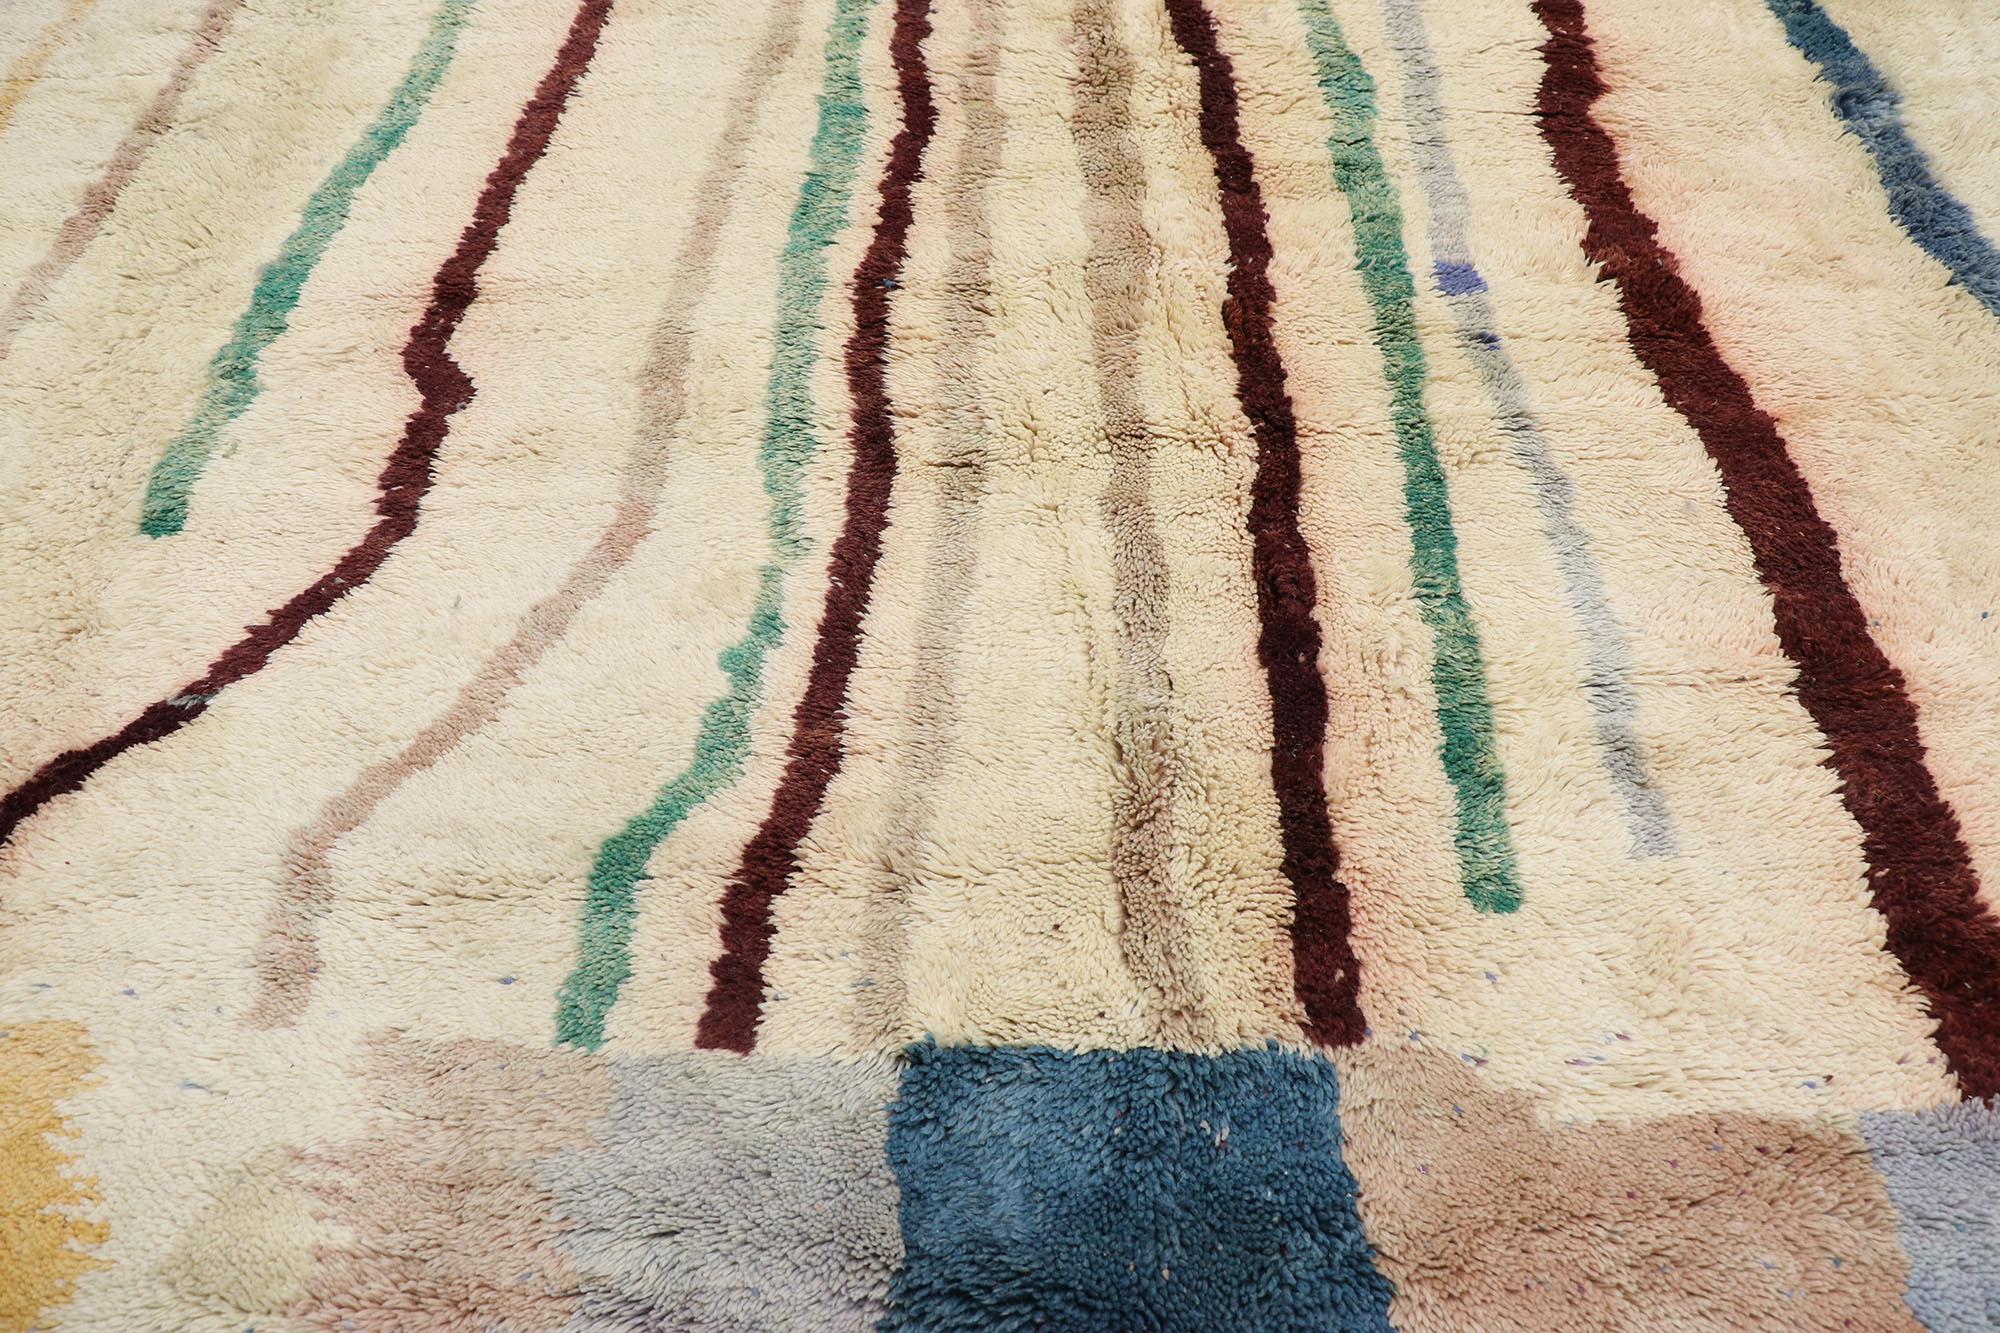 Oversized Abstract Moroccan Rug, Bohemian Rhapsody Meets Expressionist Style In New Condition For Sale In Dallas, TX